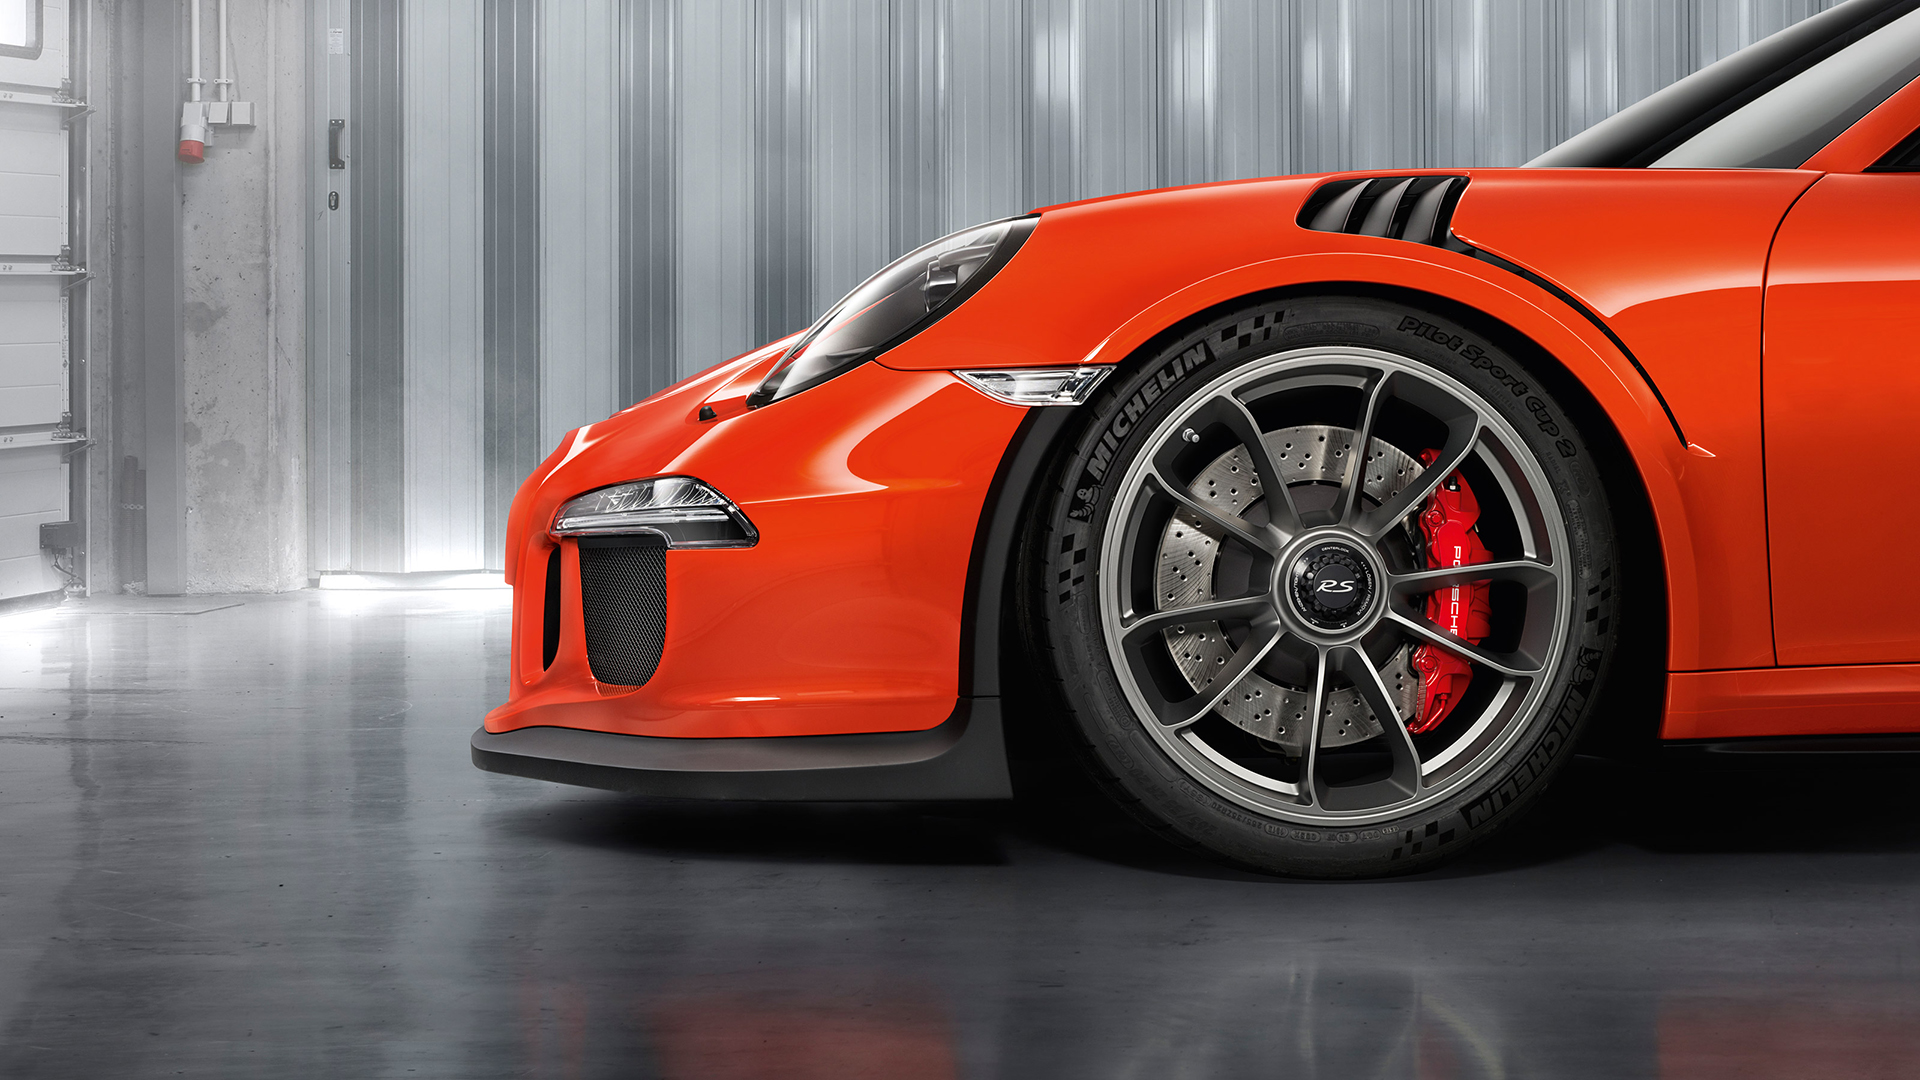 Free Download Porsche 911 Gt3 Rs Wallpaper 1920x1080 For Your